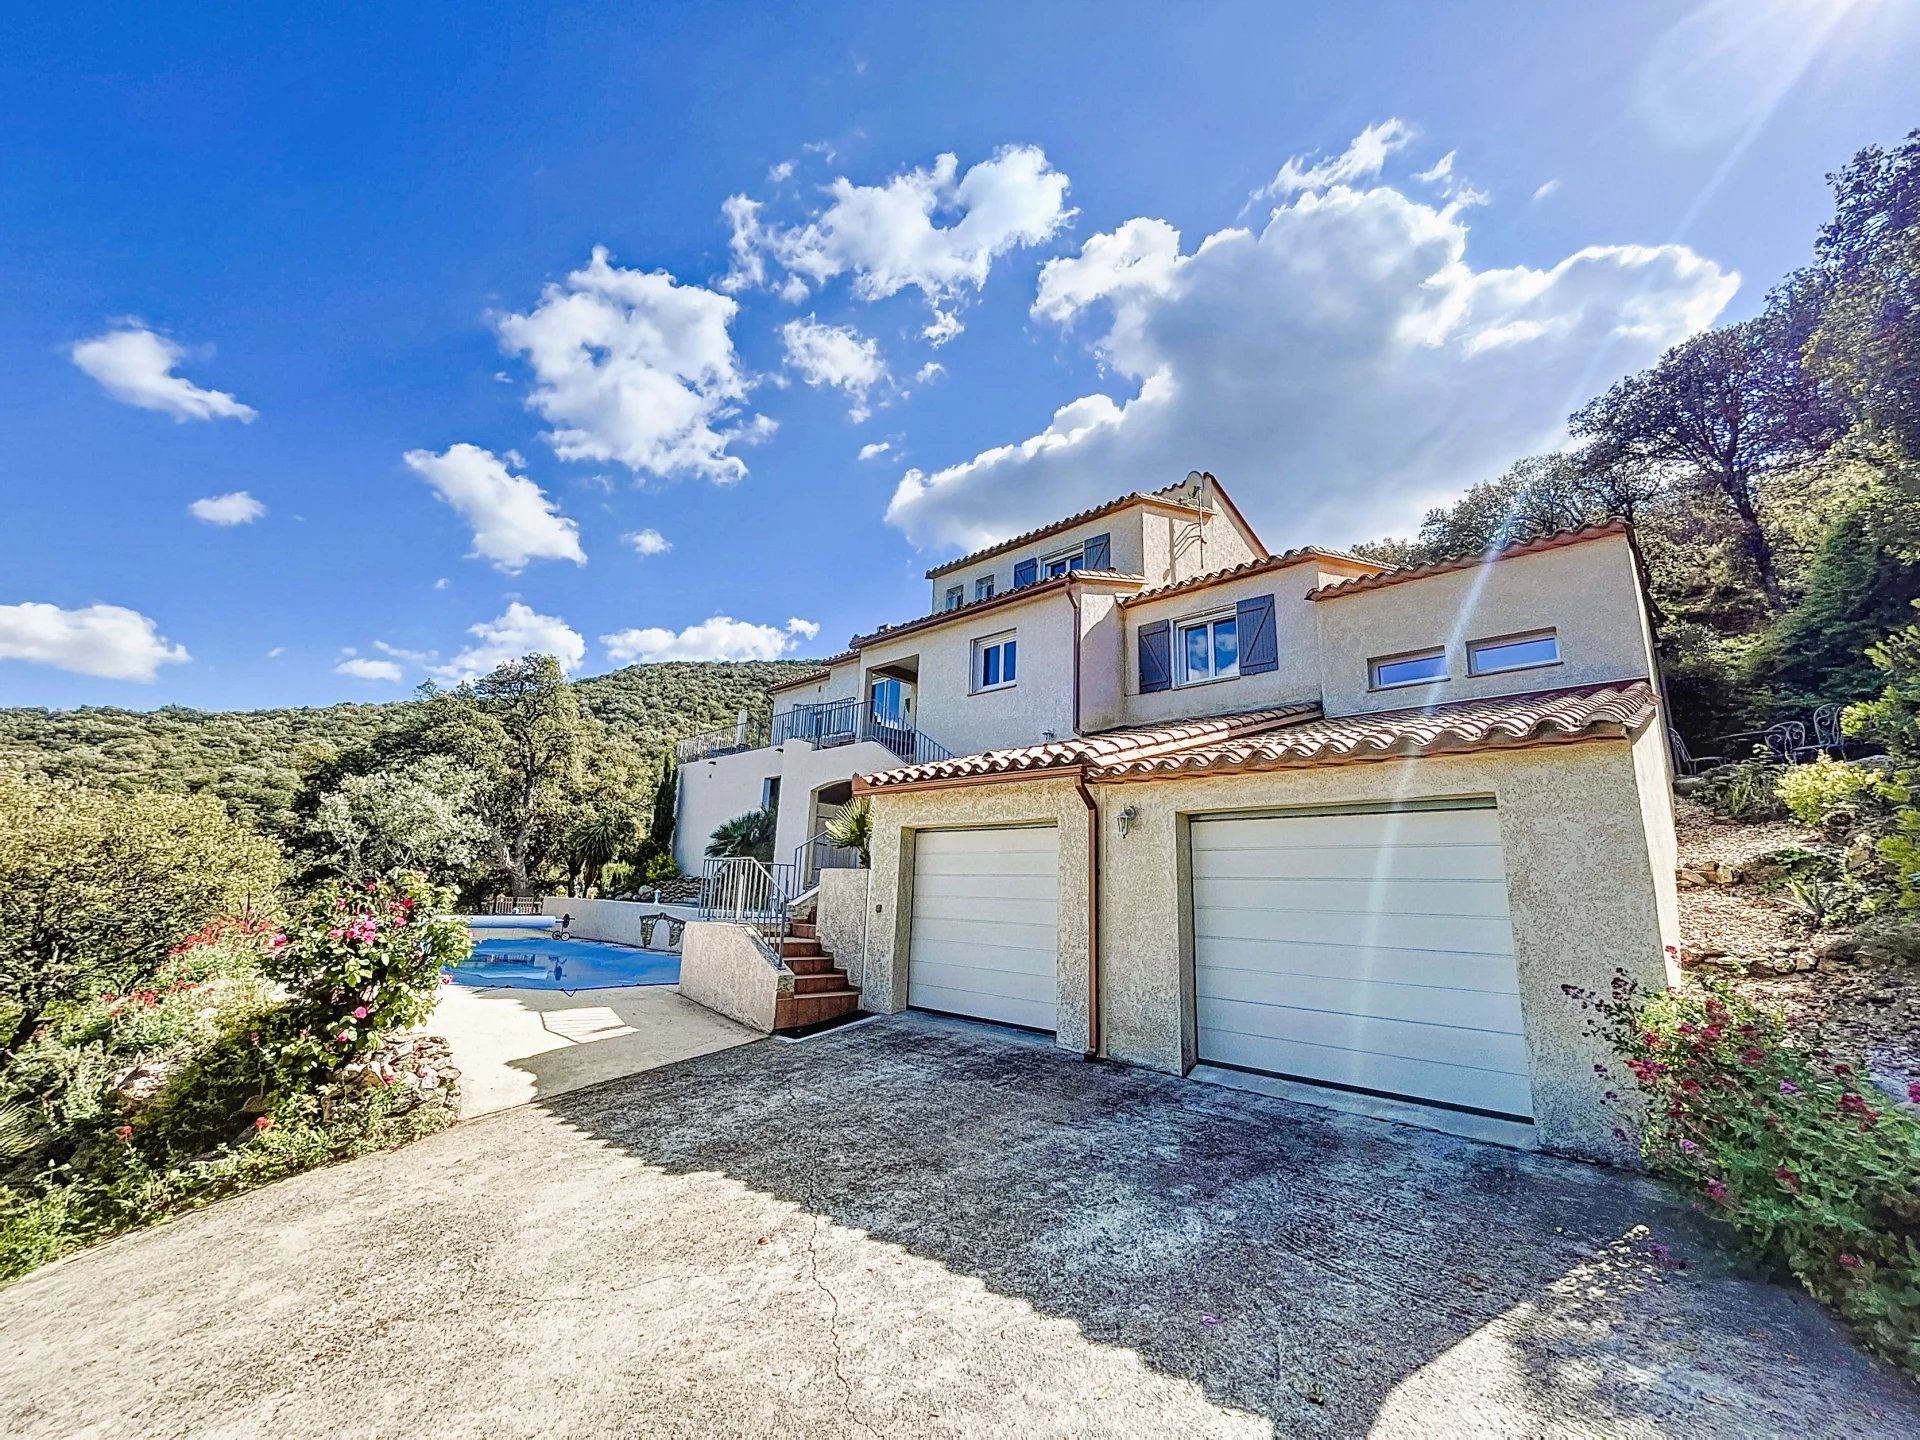 SUPERB VILLA WITH POOL AND VIEWS, CERET